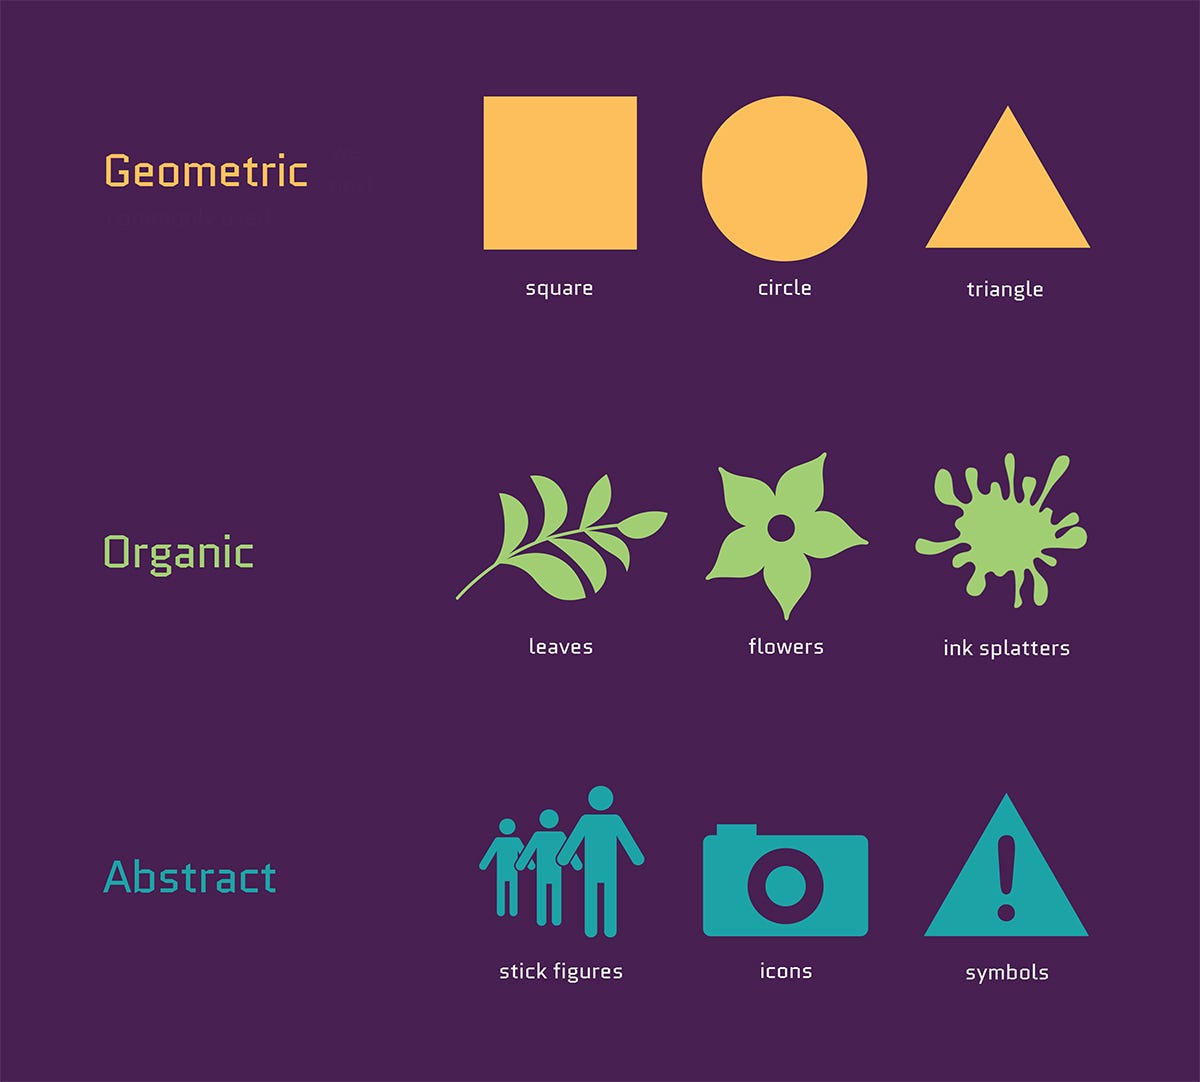 the-meaning-of-shapes-and-how-to-use-them-creatively-in-your-designs